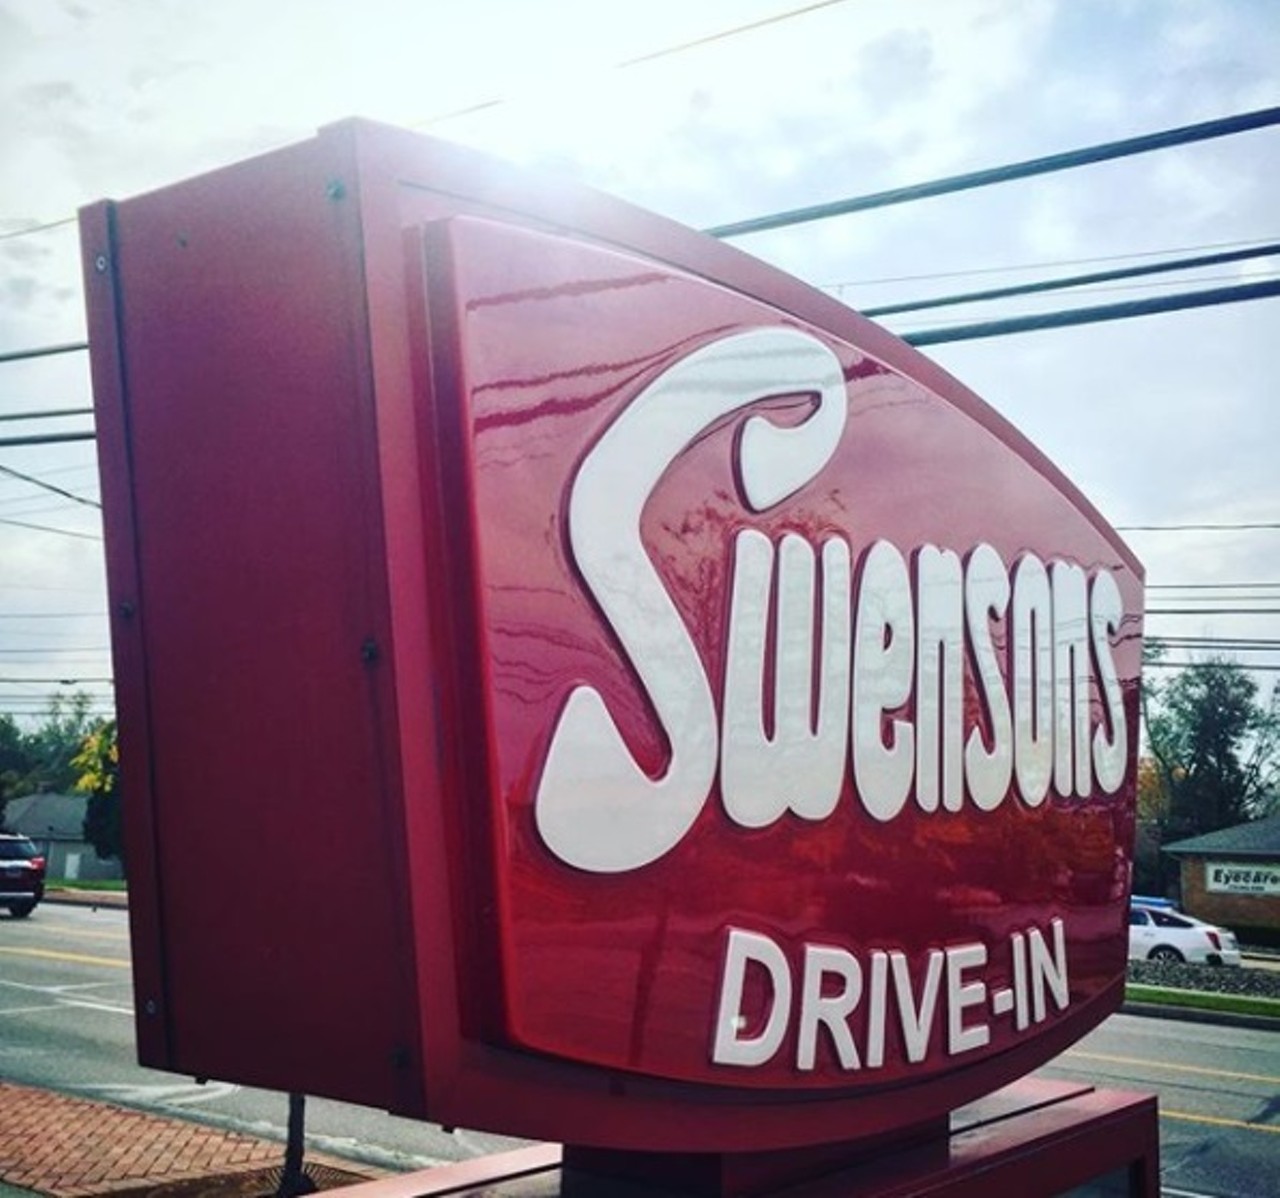 Swenson's Drive-In
14510 Cedar Rd., University Heights
The new retro-inspired building will open next to Jack's Deli.
Photo via mallorymordaunt/Instagram